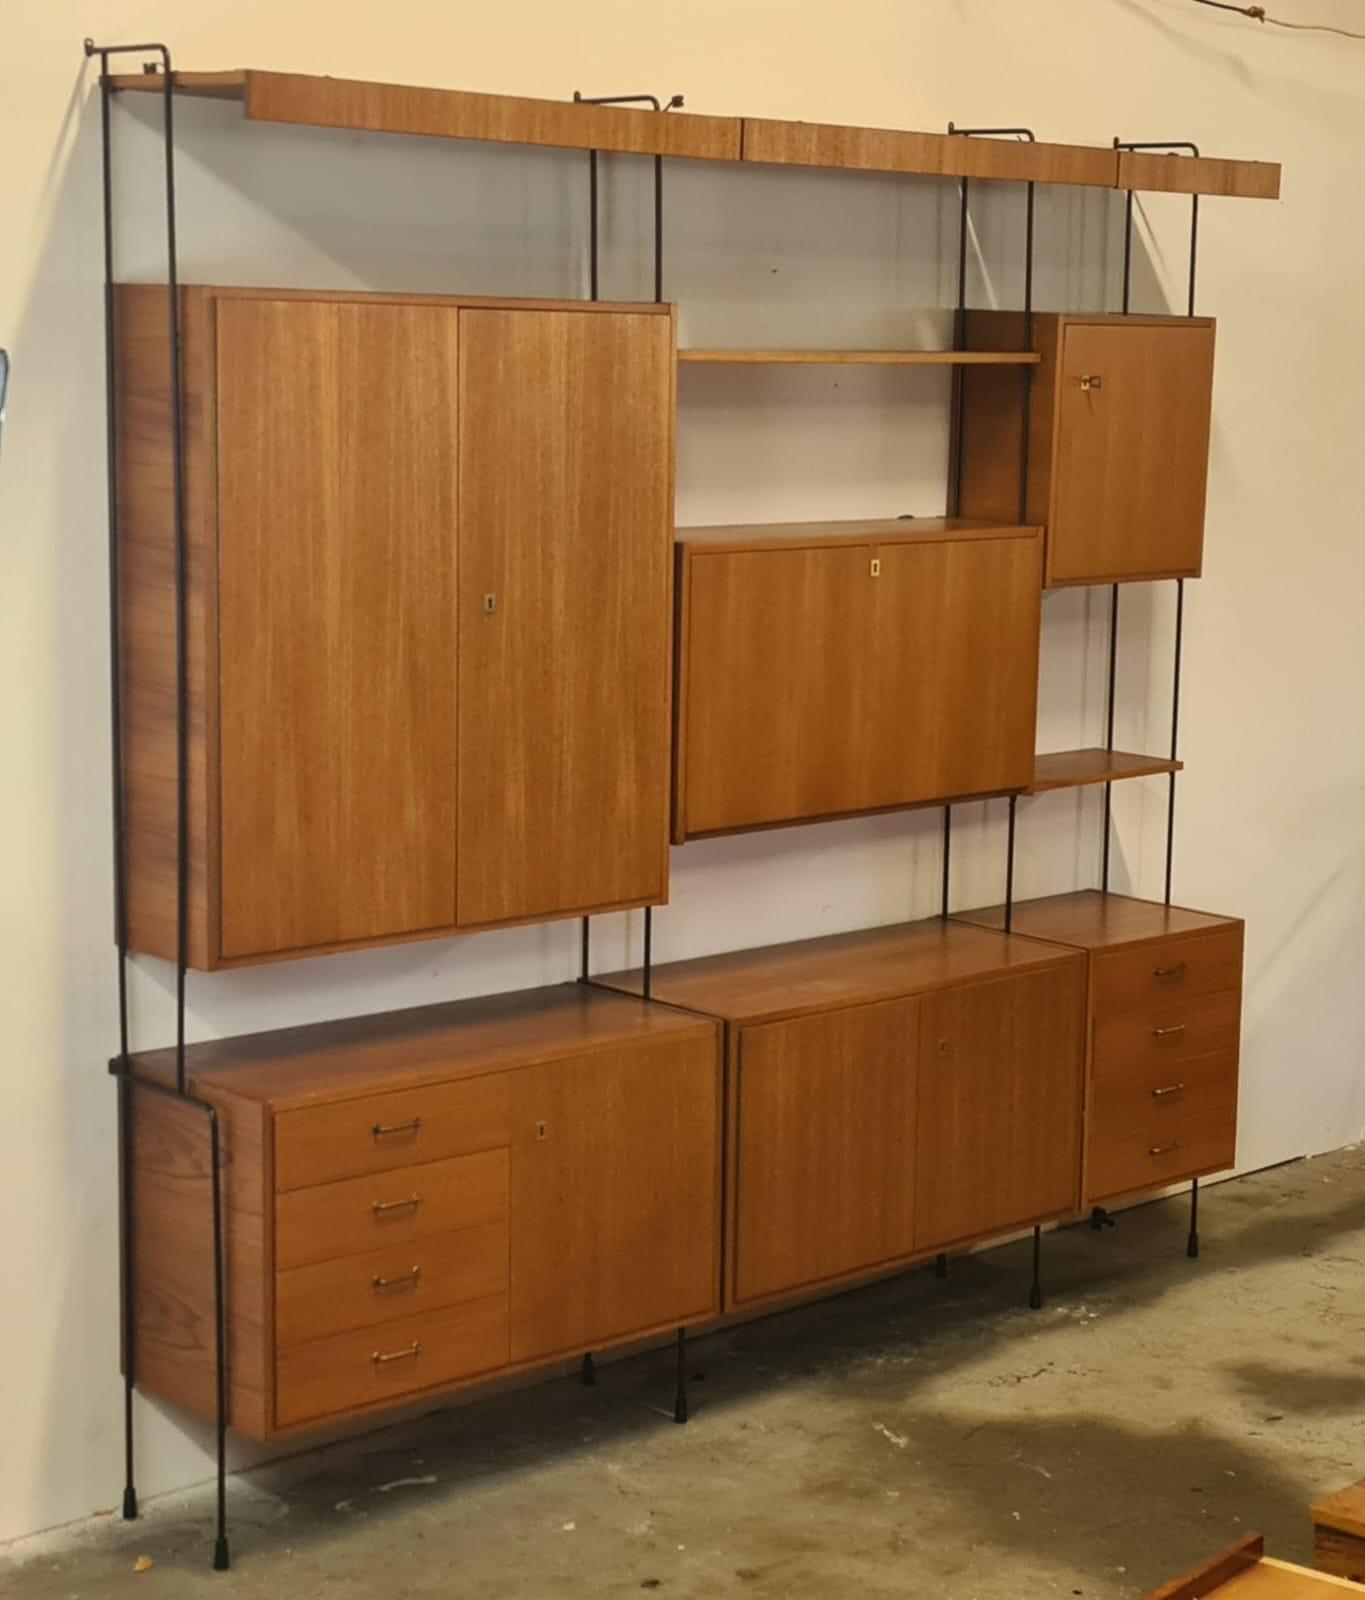 Mid century wall unit in designed by Ersnt Dieter Hilker model 'Omnia'.

The wall unit is completely modular.

Illuminated bar cabinet.

Good condition with normal age related wear. 

1960s - Germany

Height: 220cm/86.61